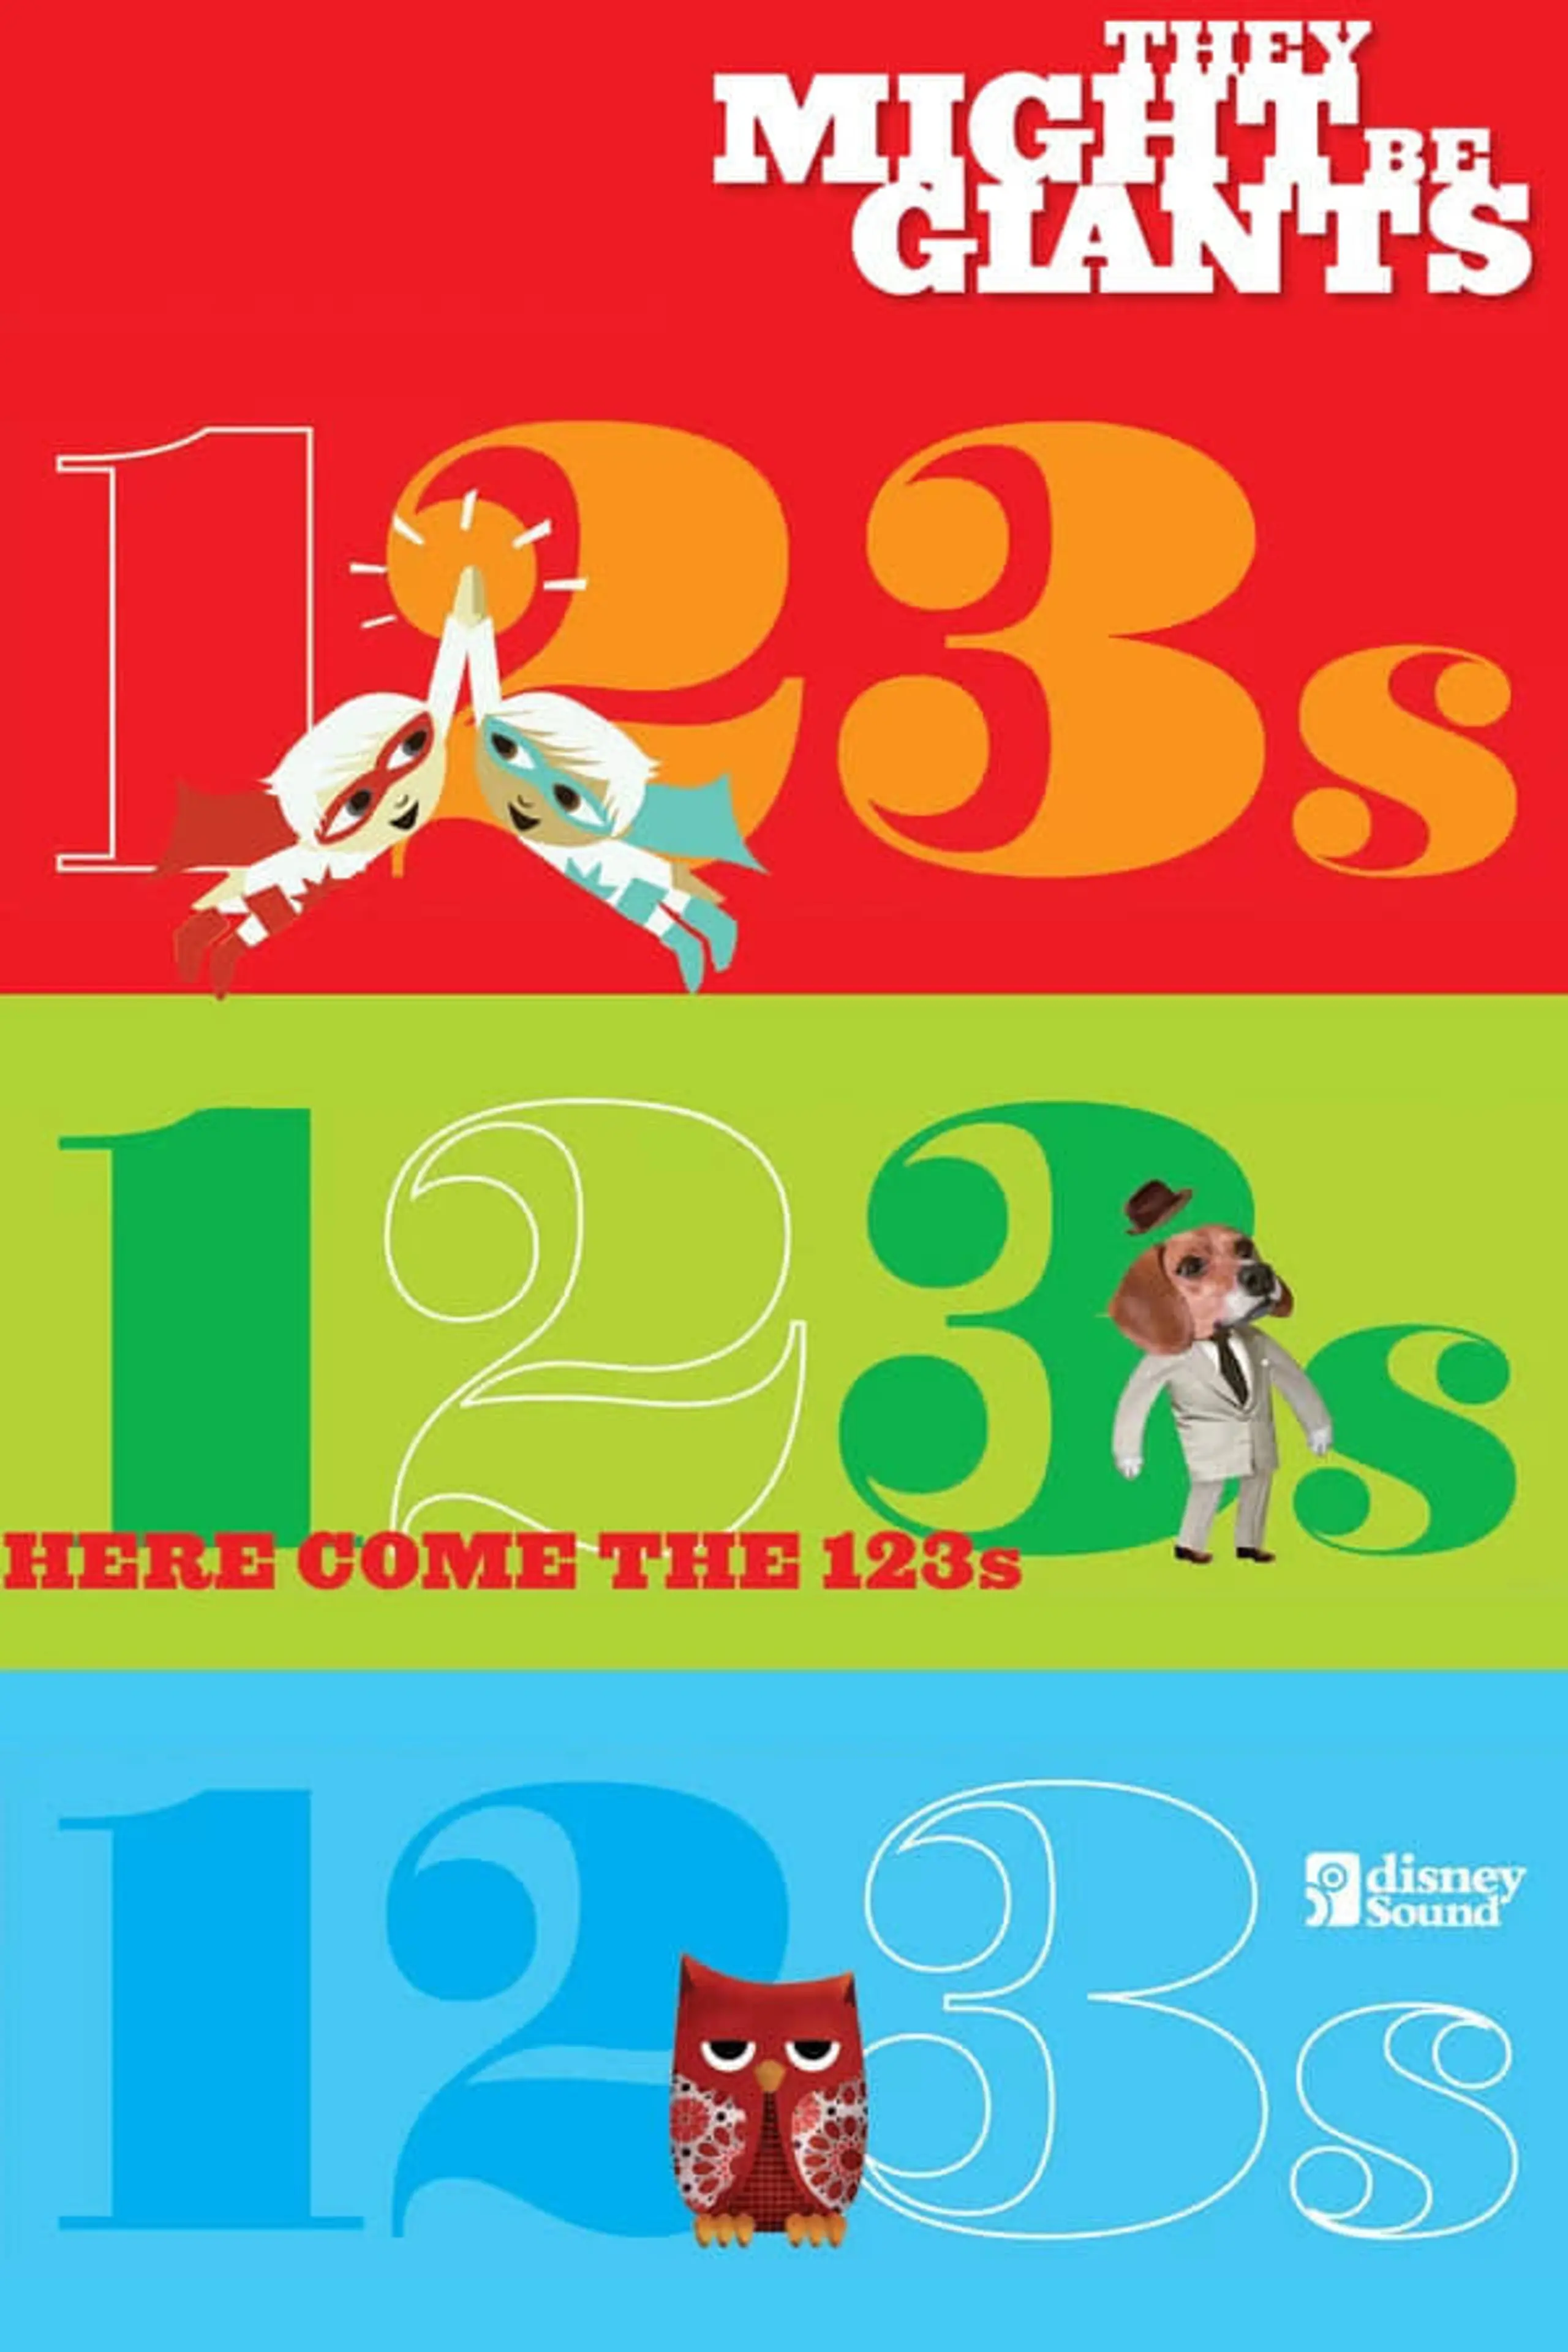 They Might Be Giants: Here Come the 123s